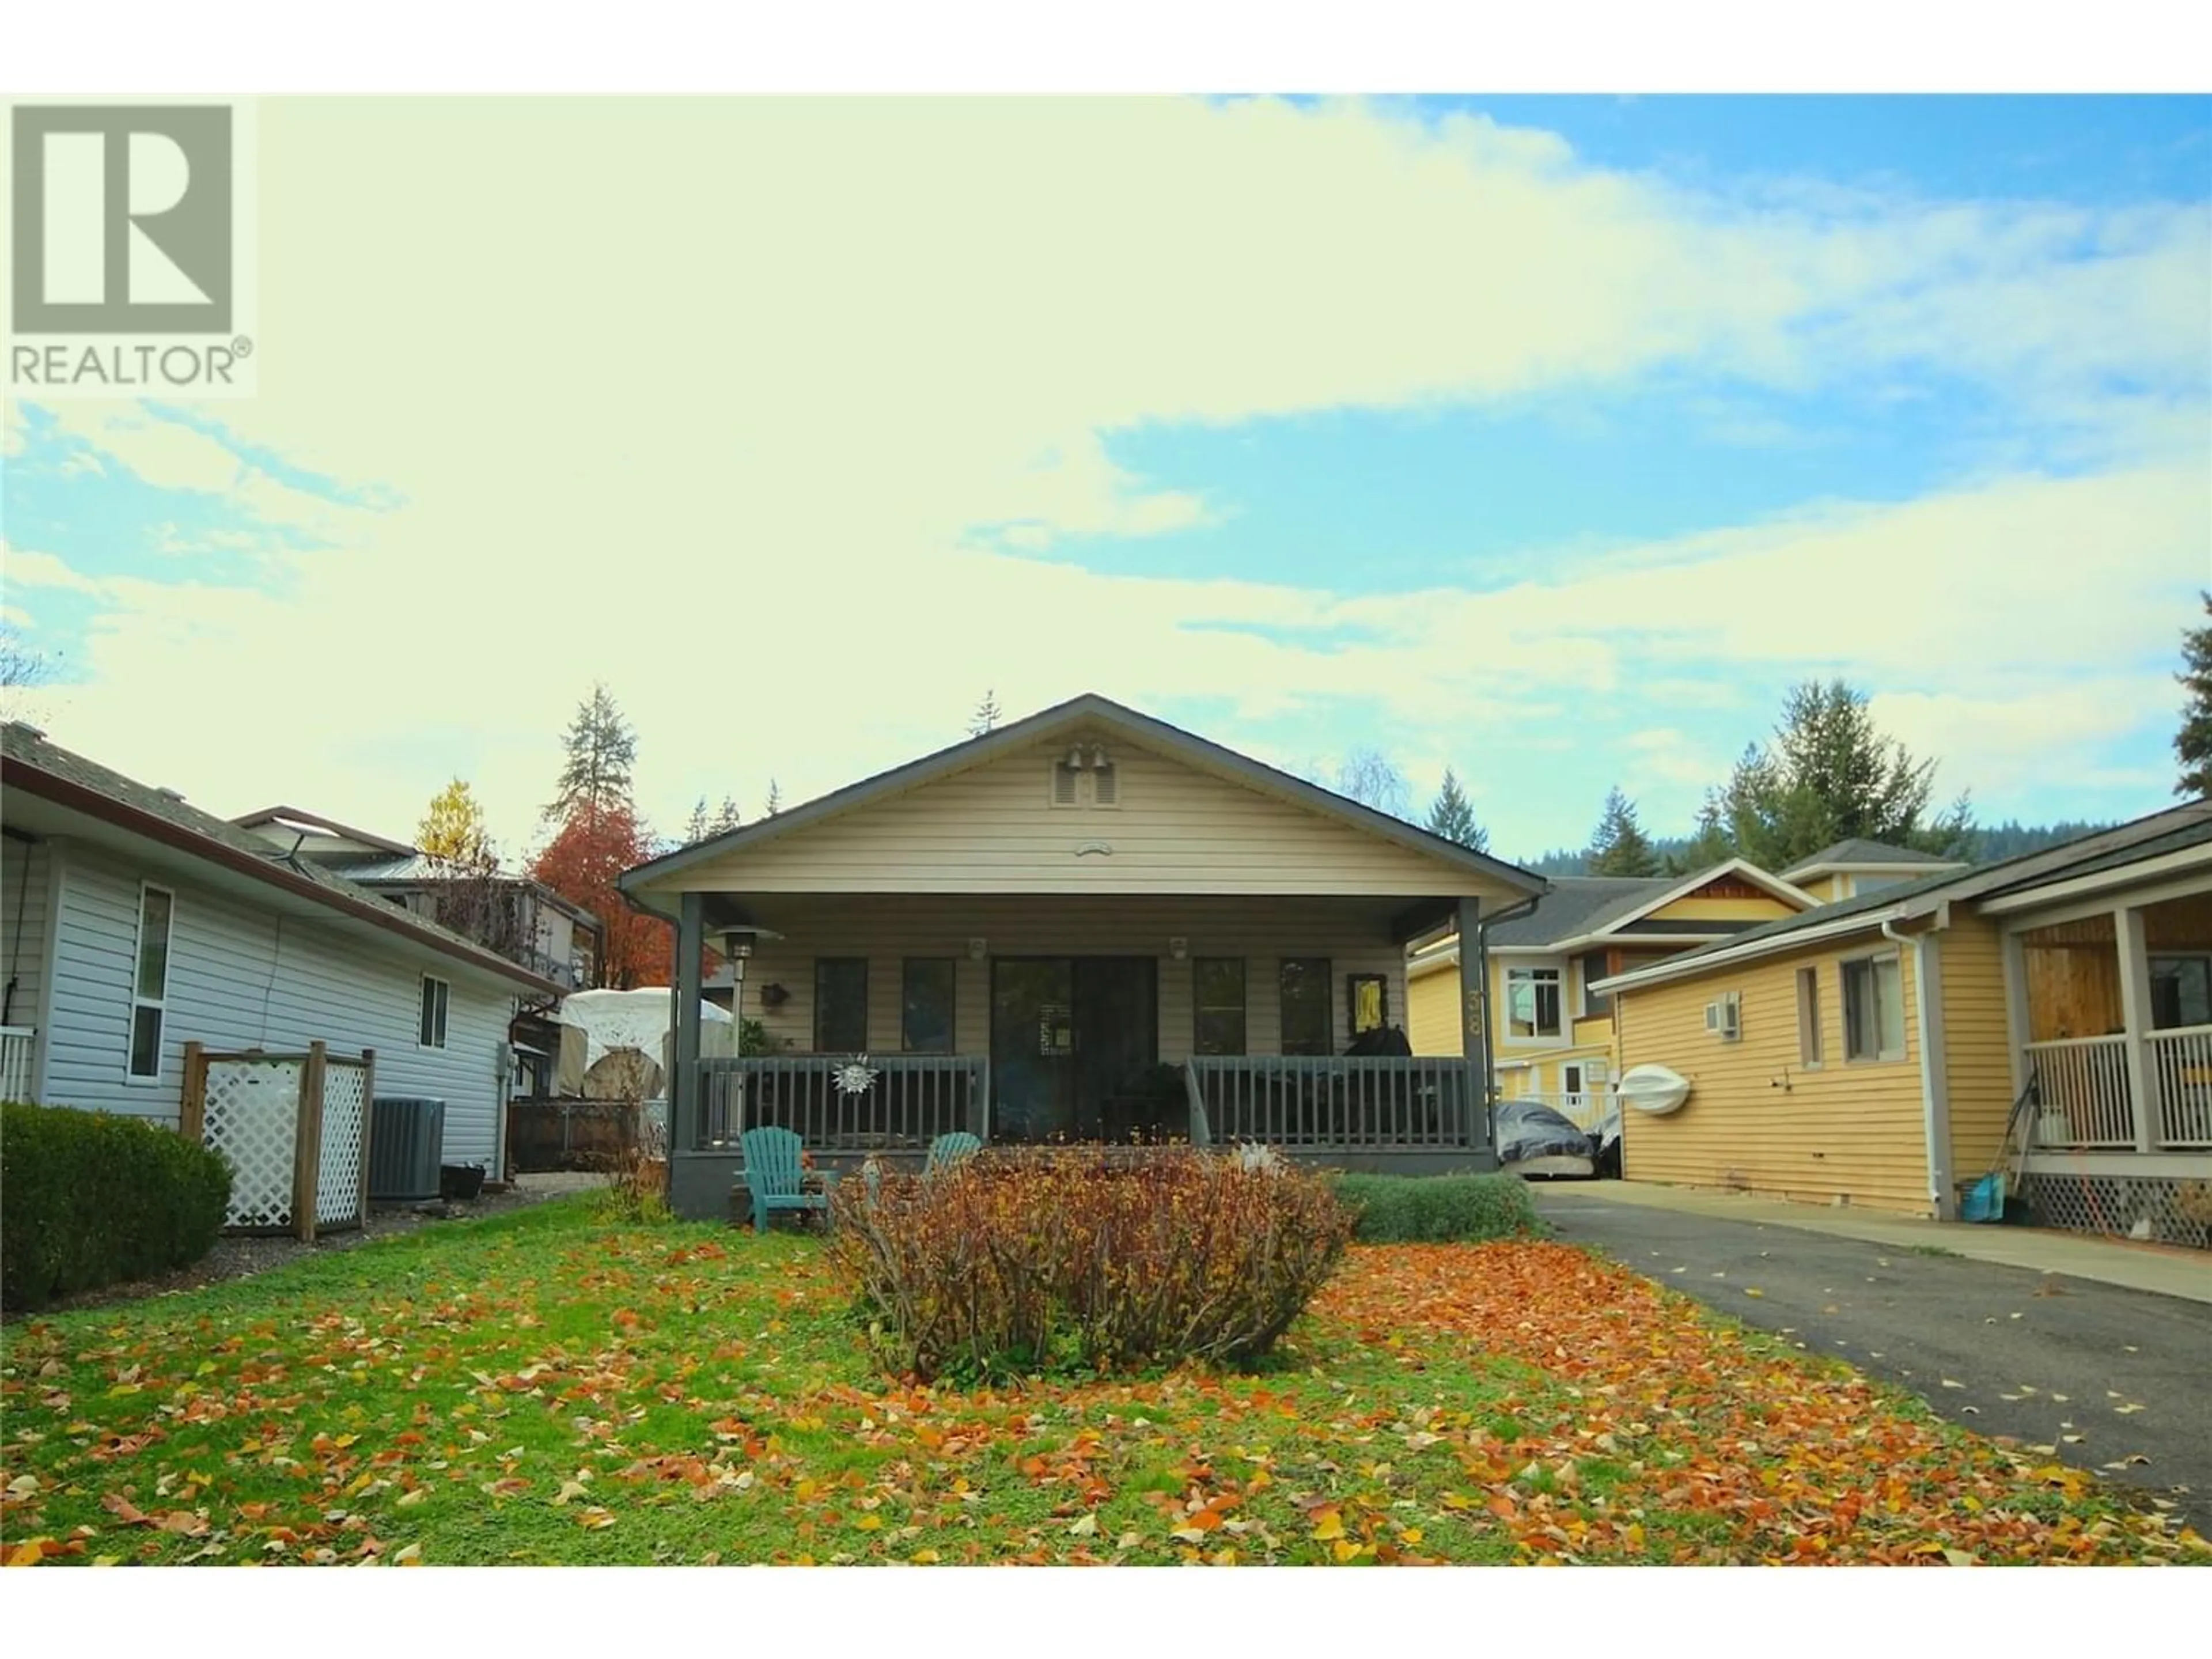 Home with unknown exterior material for 38 Lakeshore Road, Vernon British Columbia V1H2A1